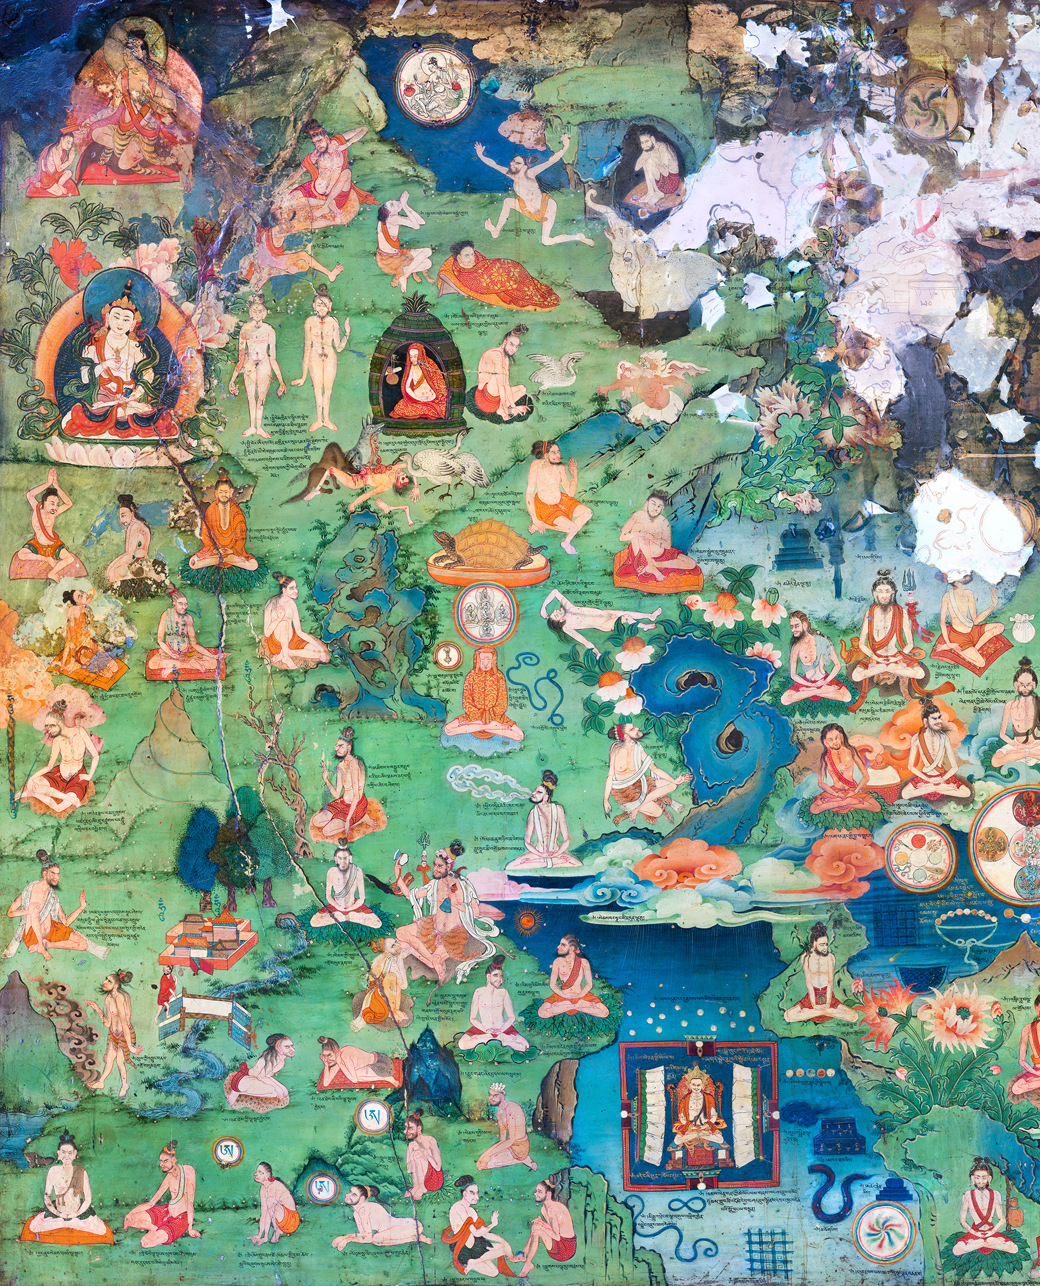 Detail of mural depicting landscape populated by dozens of figures engaged in various activities and poses